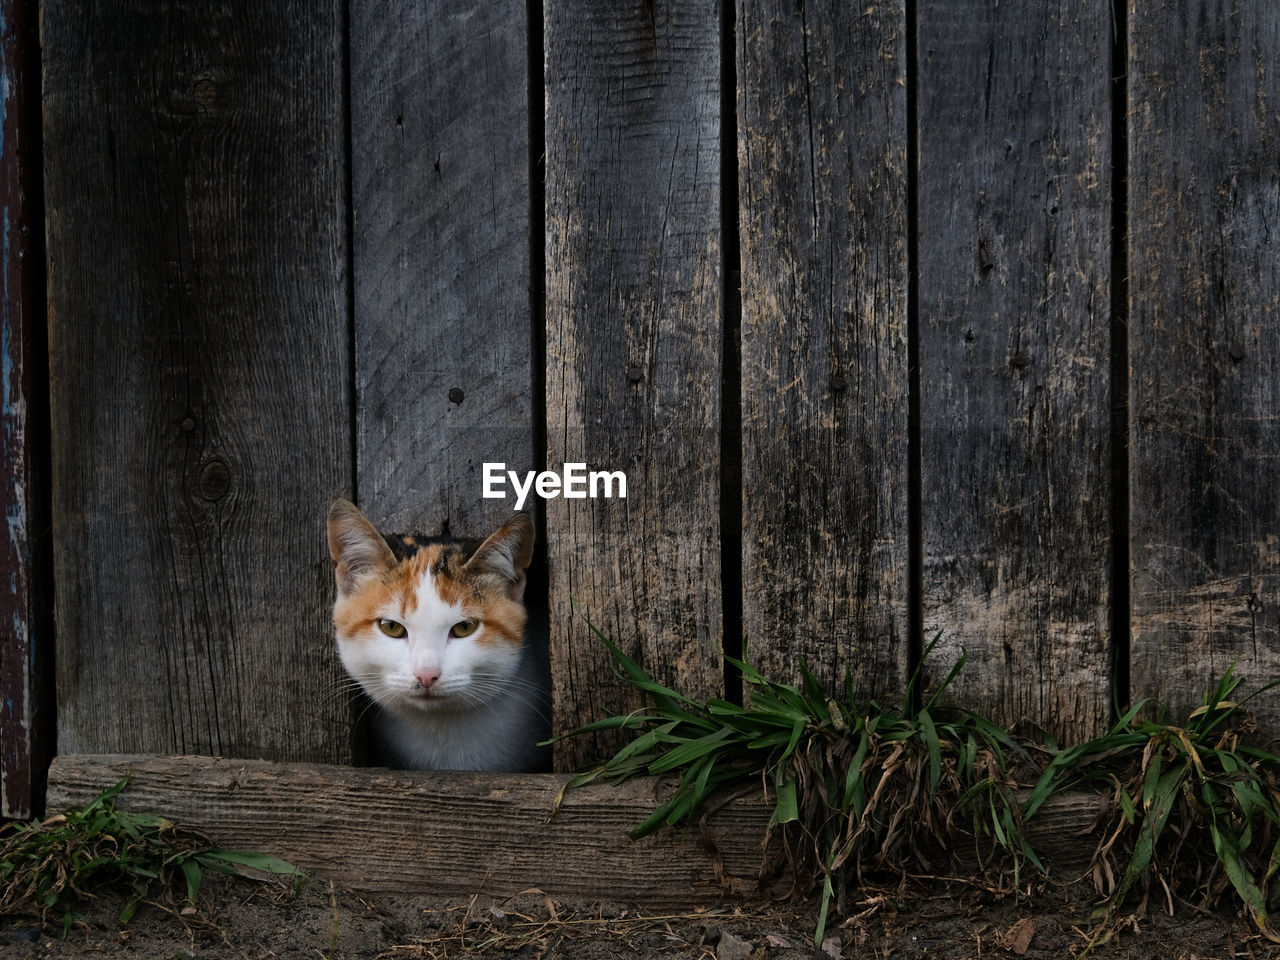 Cat peeking out of a hole in the old wooden fence